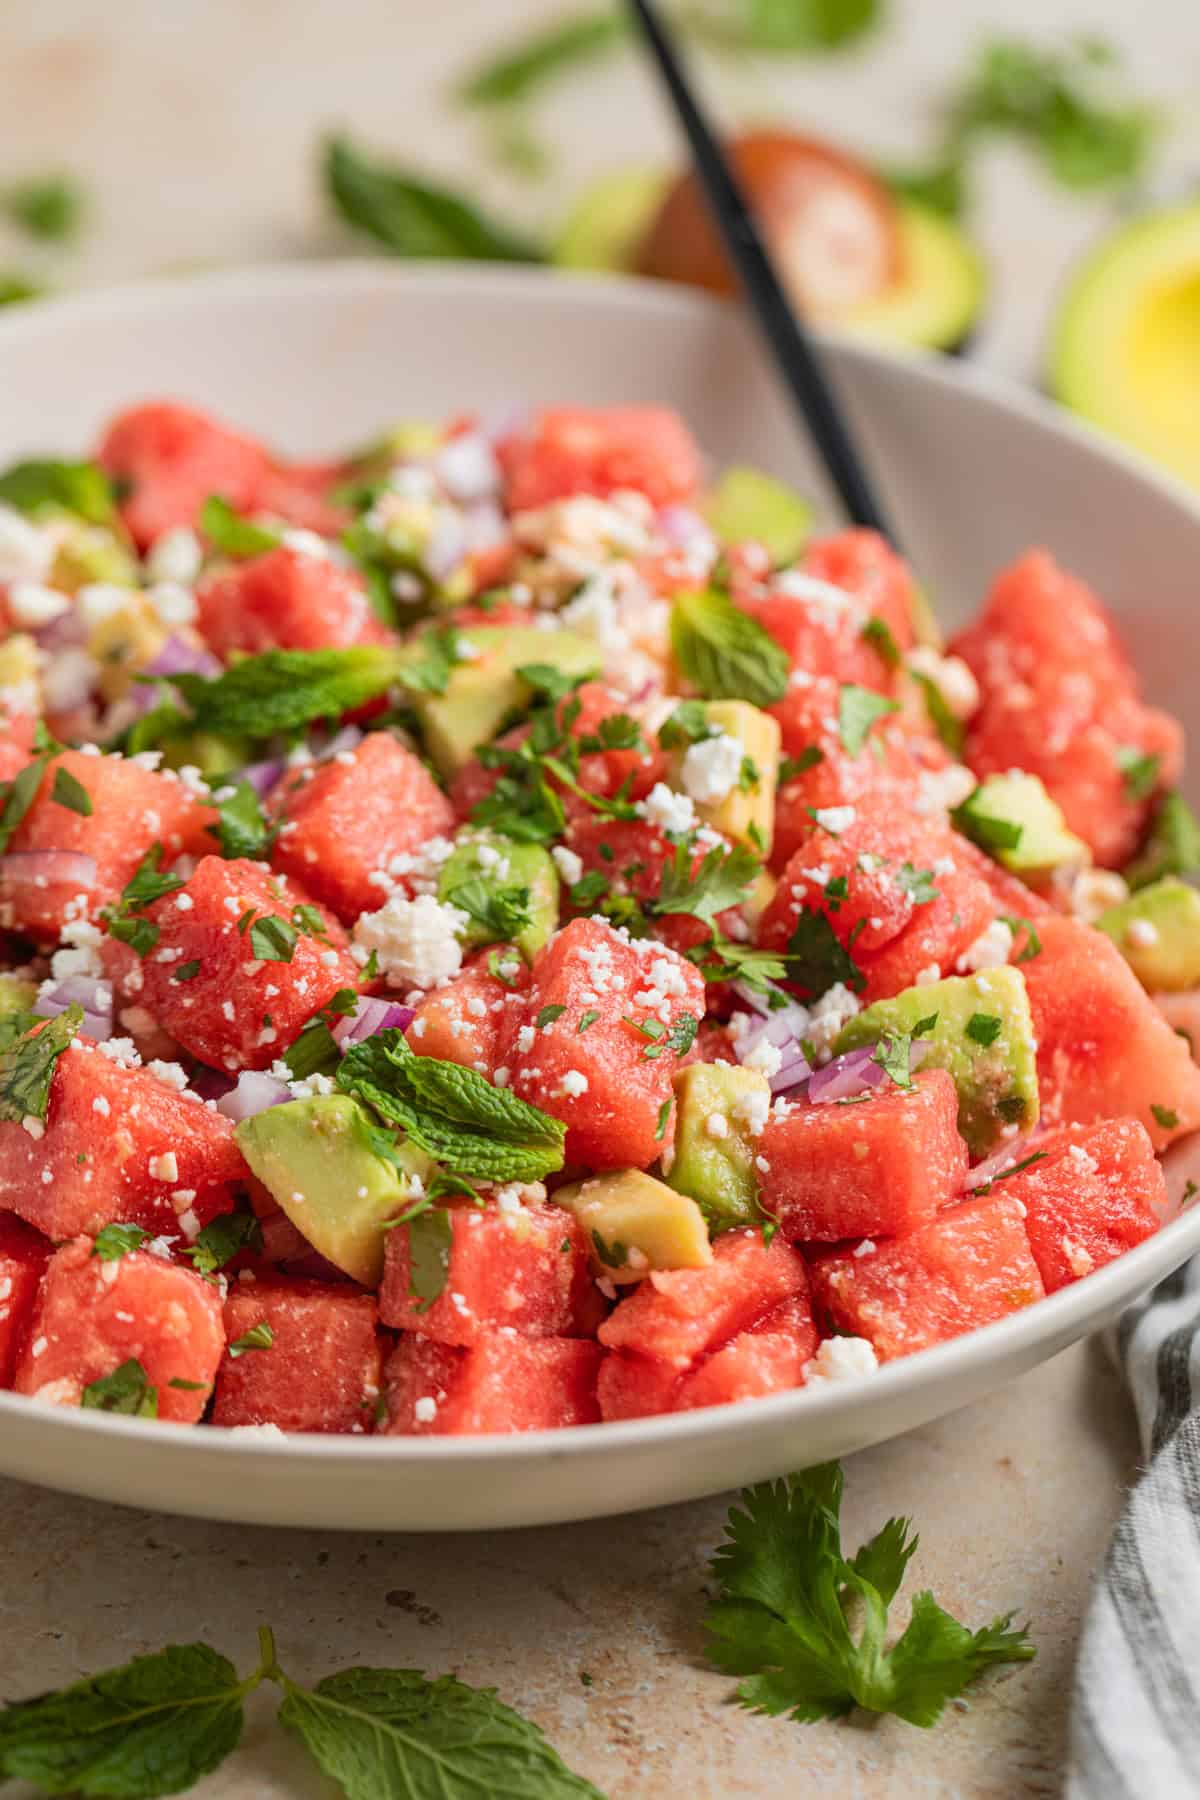 Salad bowl with watermelon, feta and avocado salad with spoon.